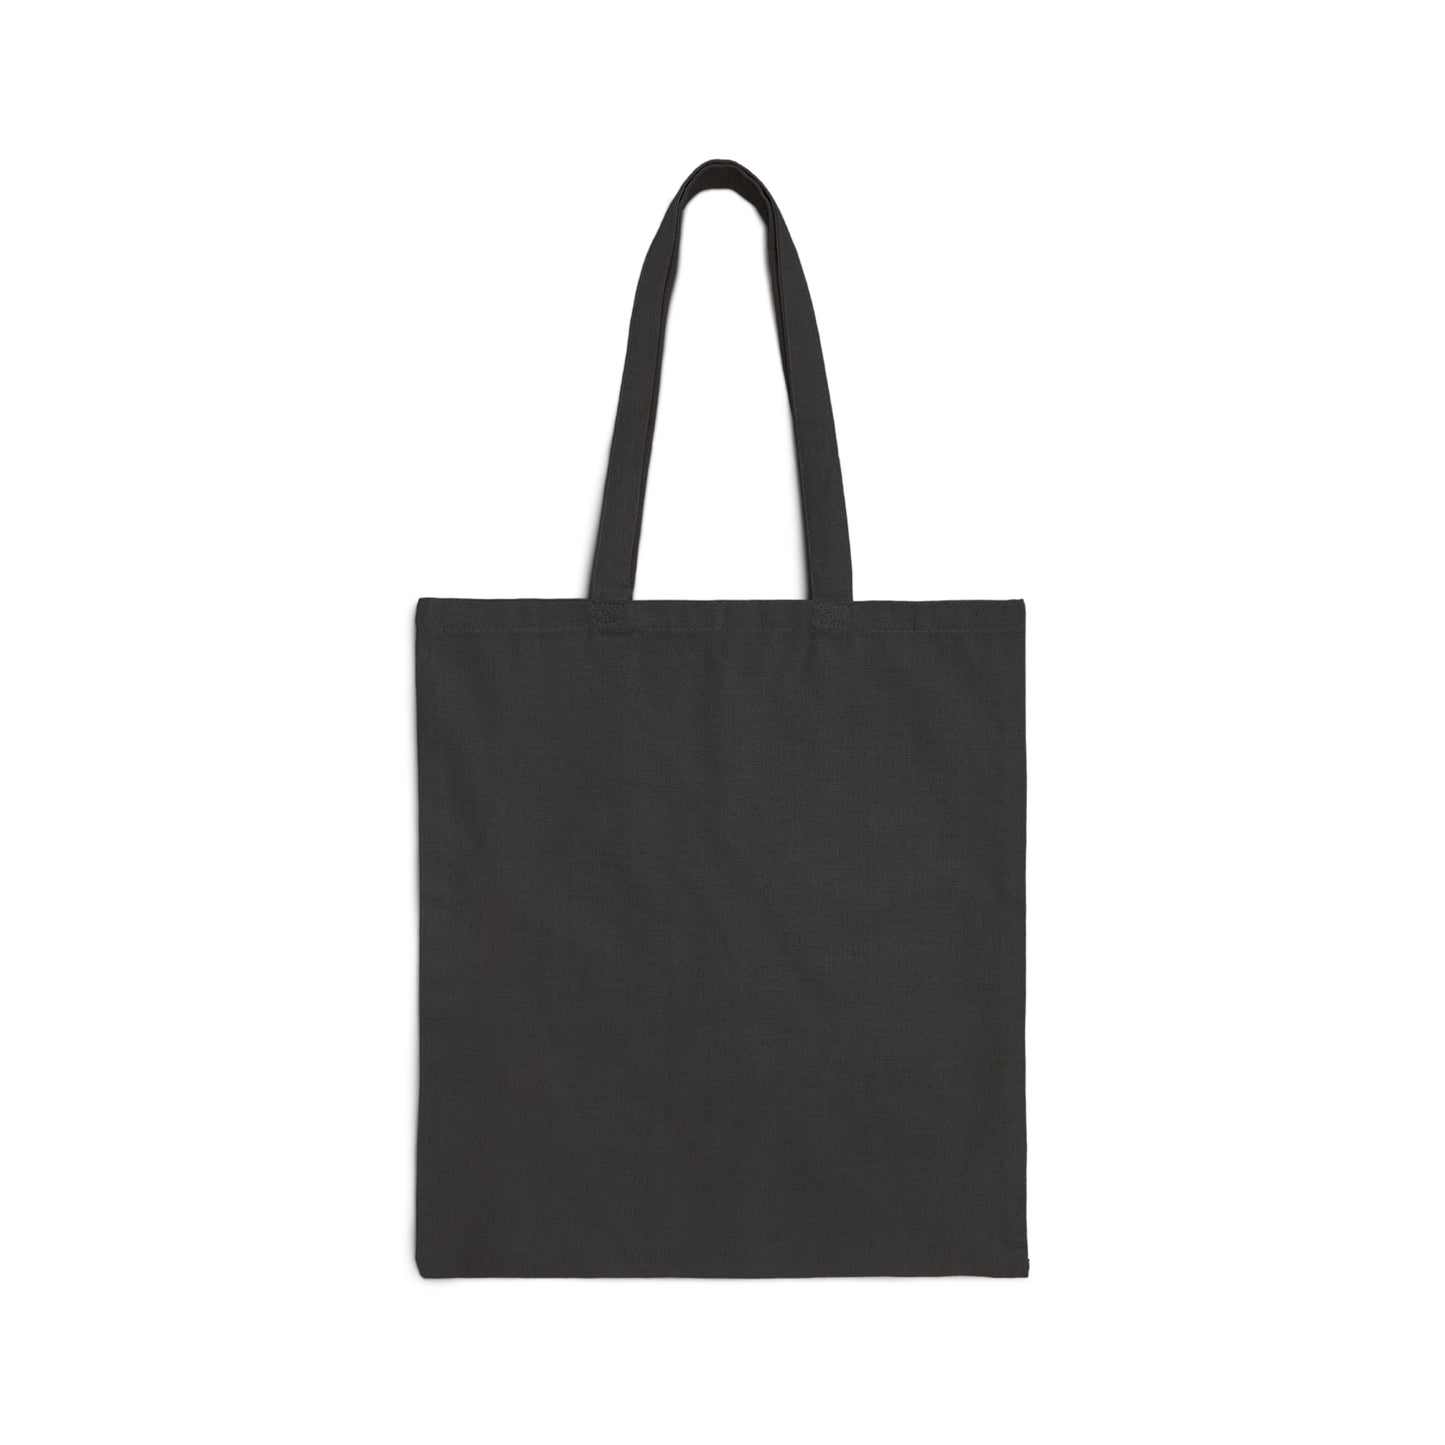 Cotton Canvas Tote Bag: Witches and Wizards #3